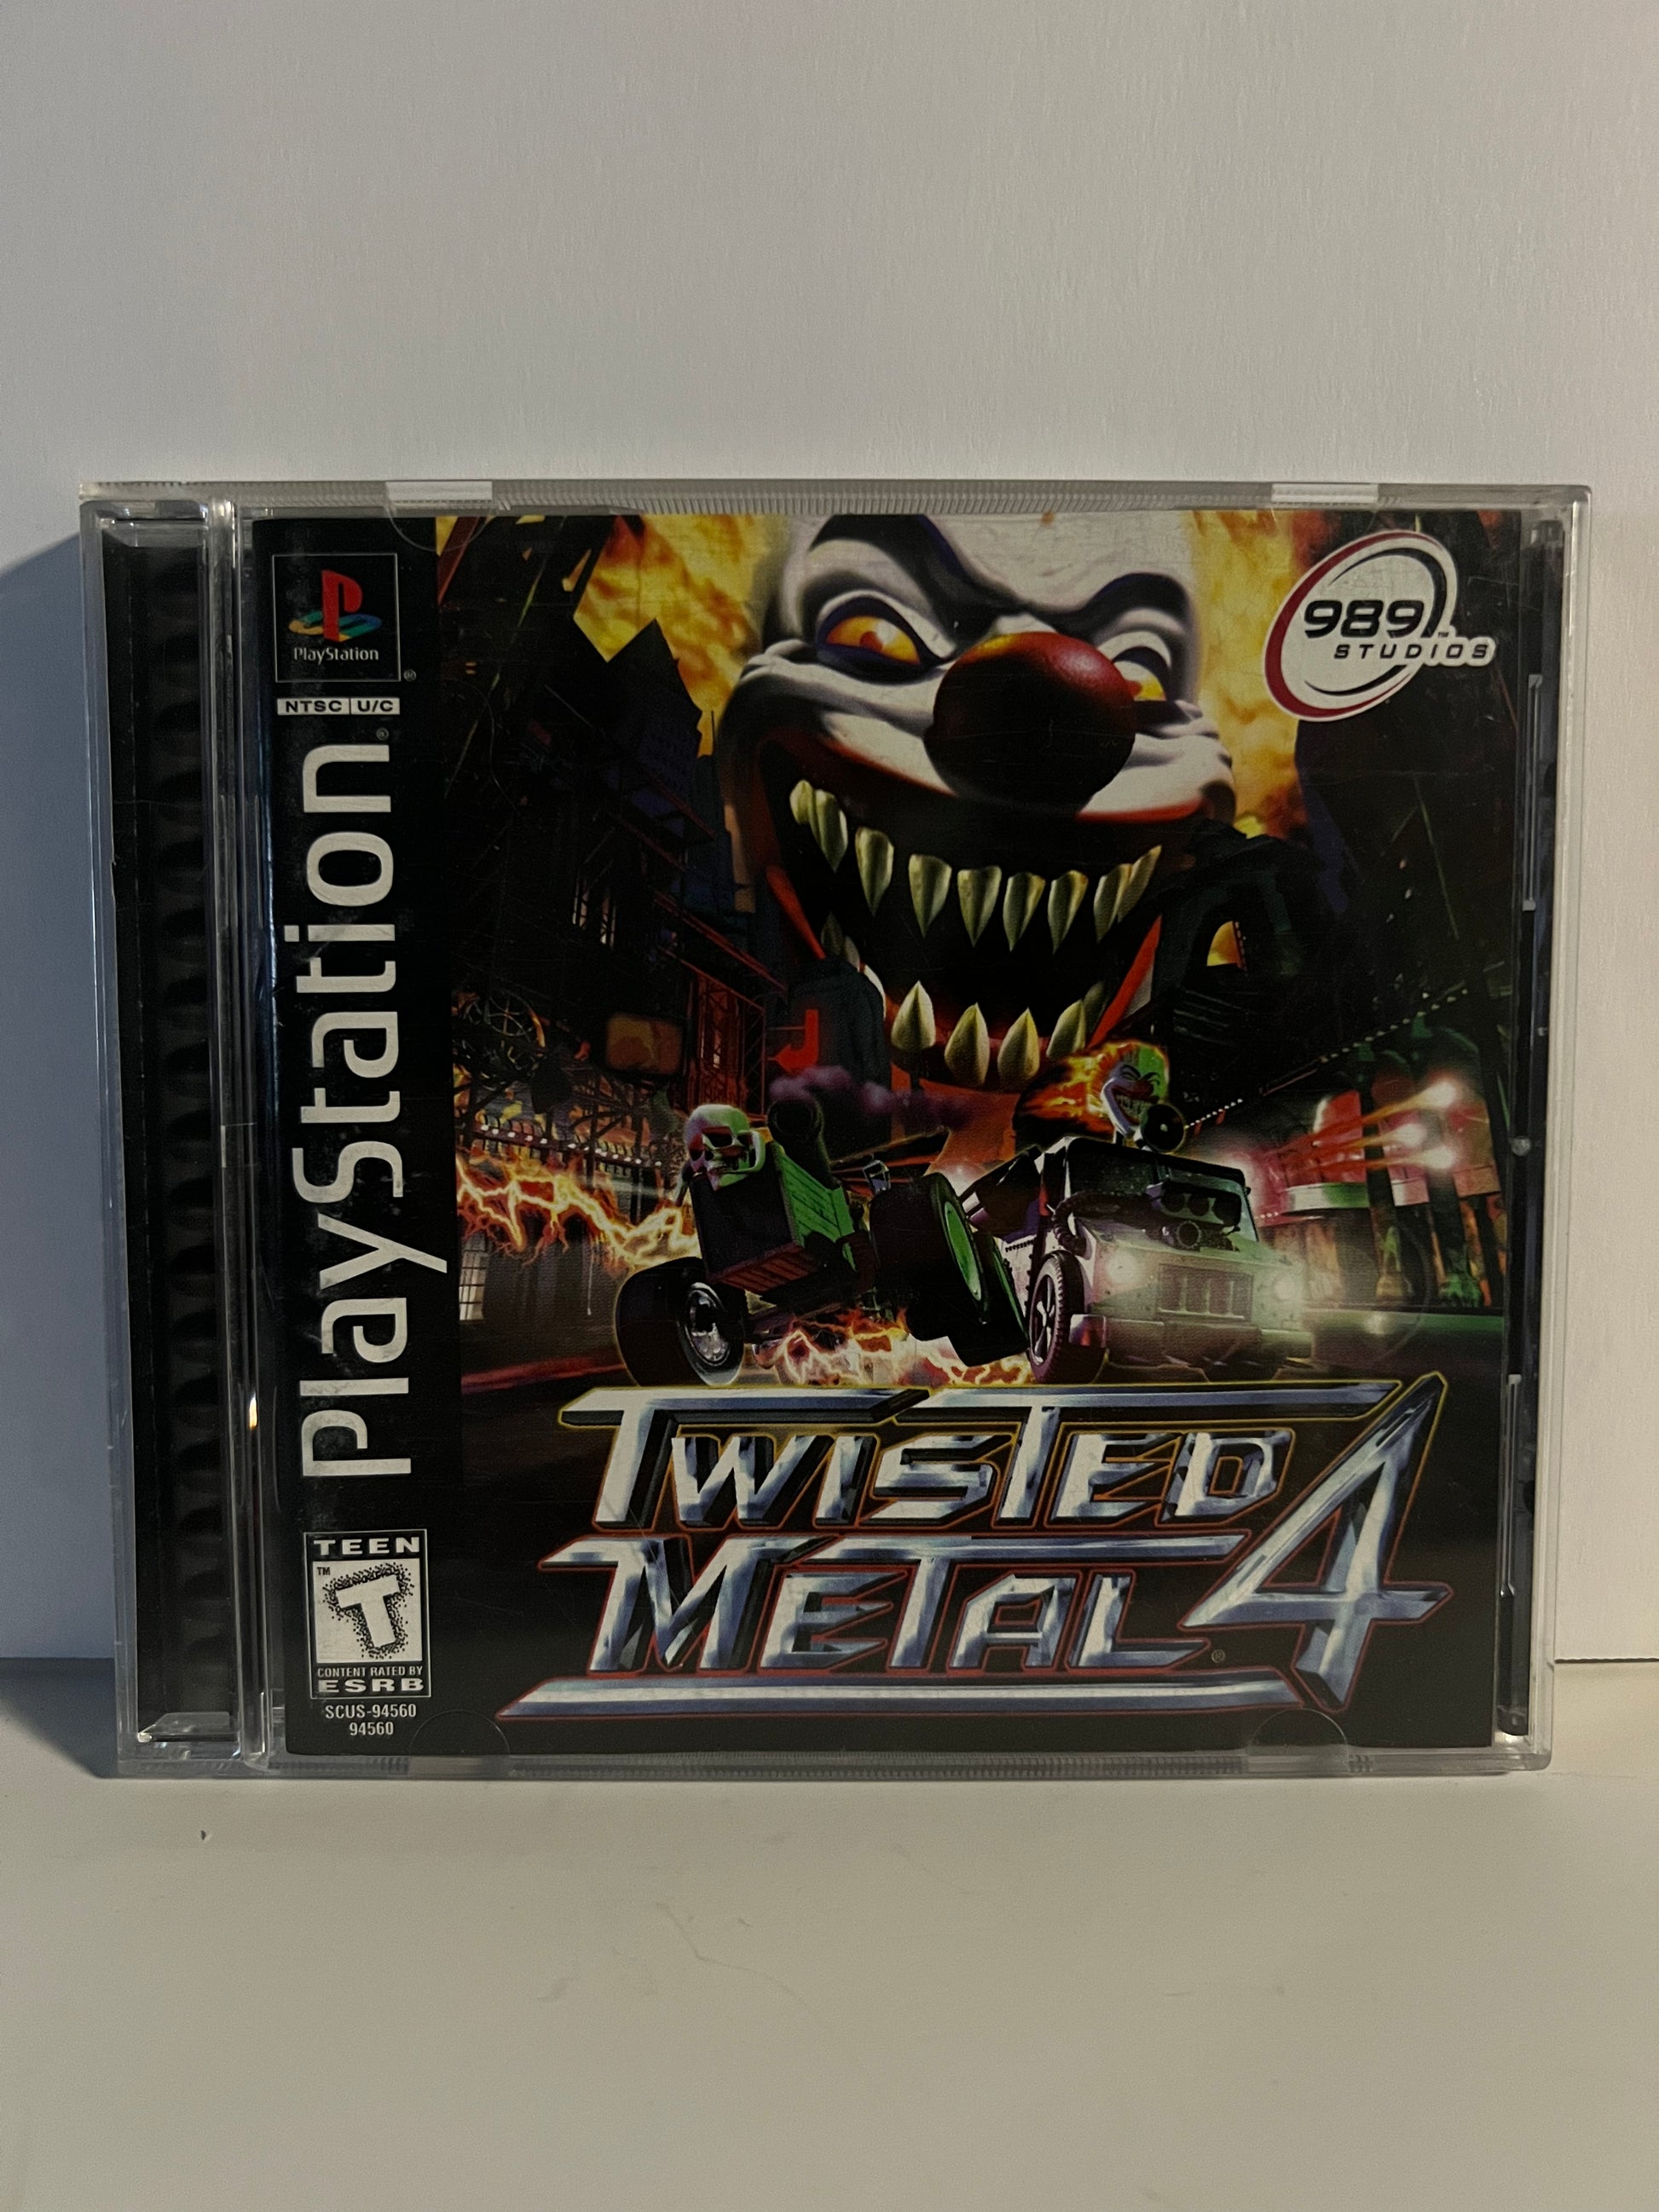 Twisted Metal 4 For PlayStation 1 PS1